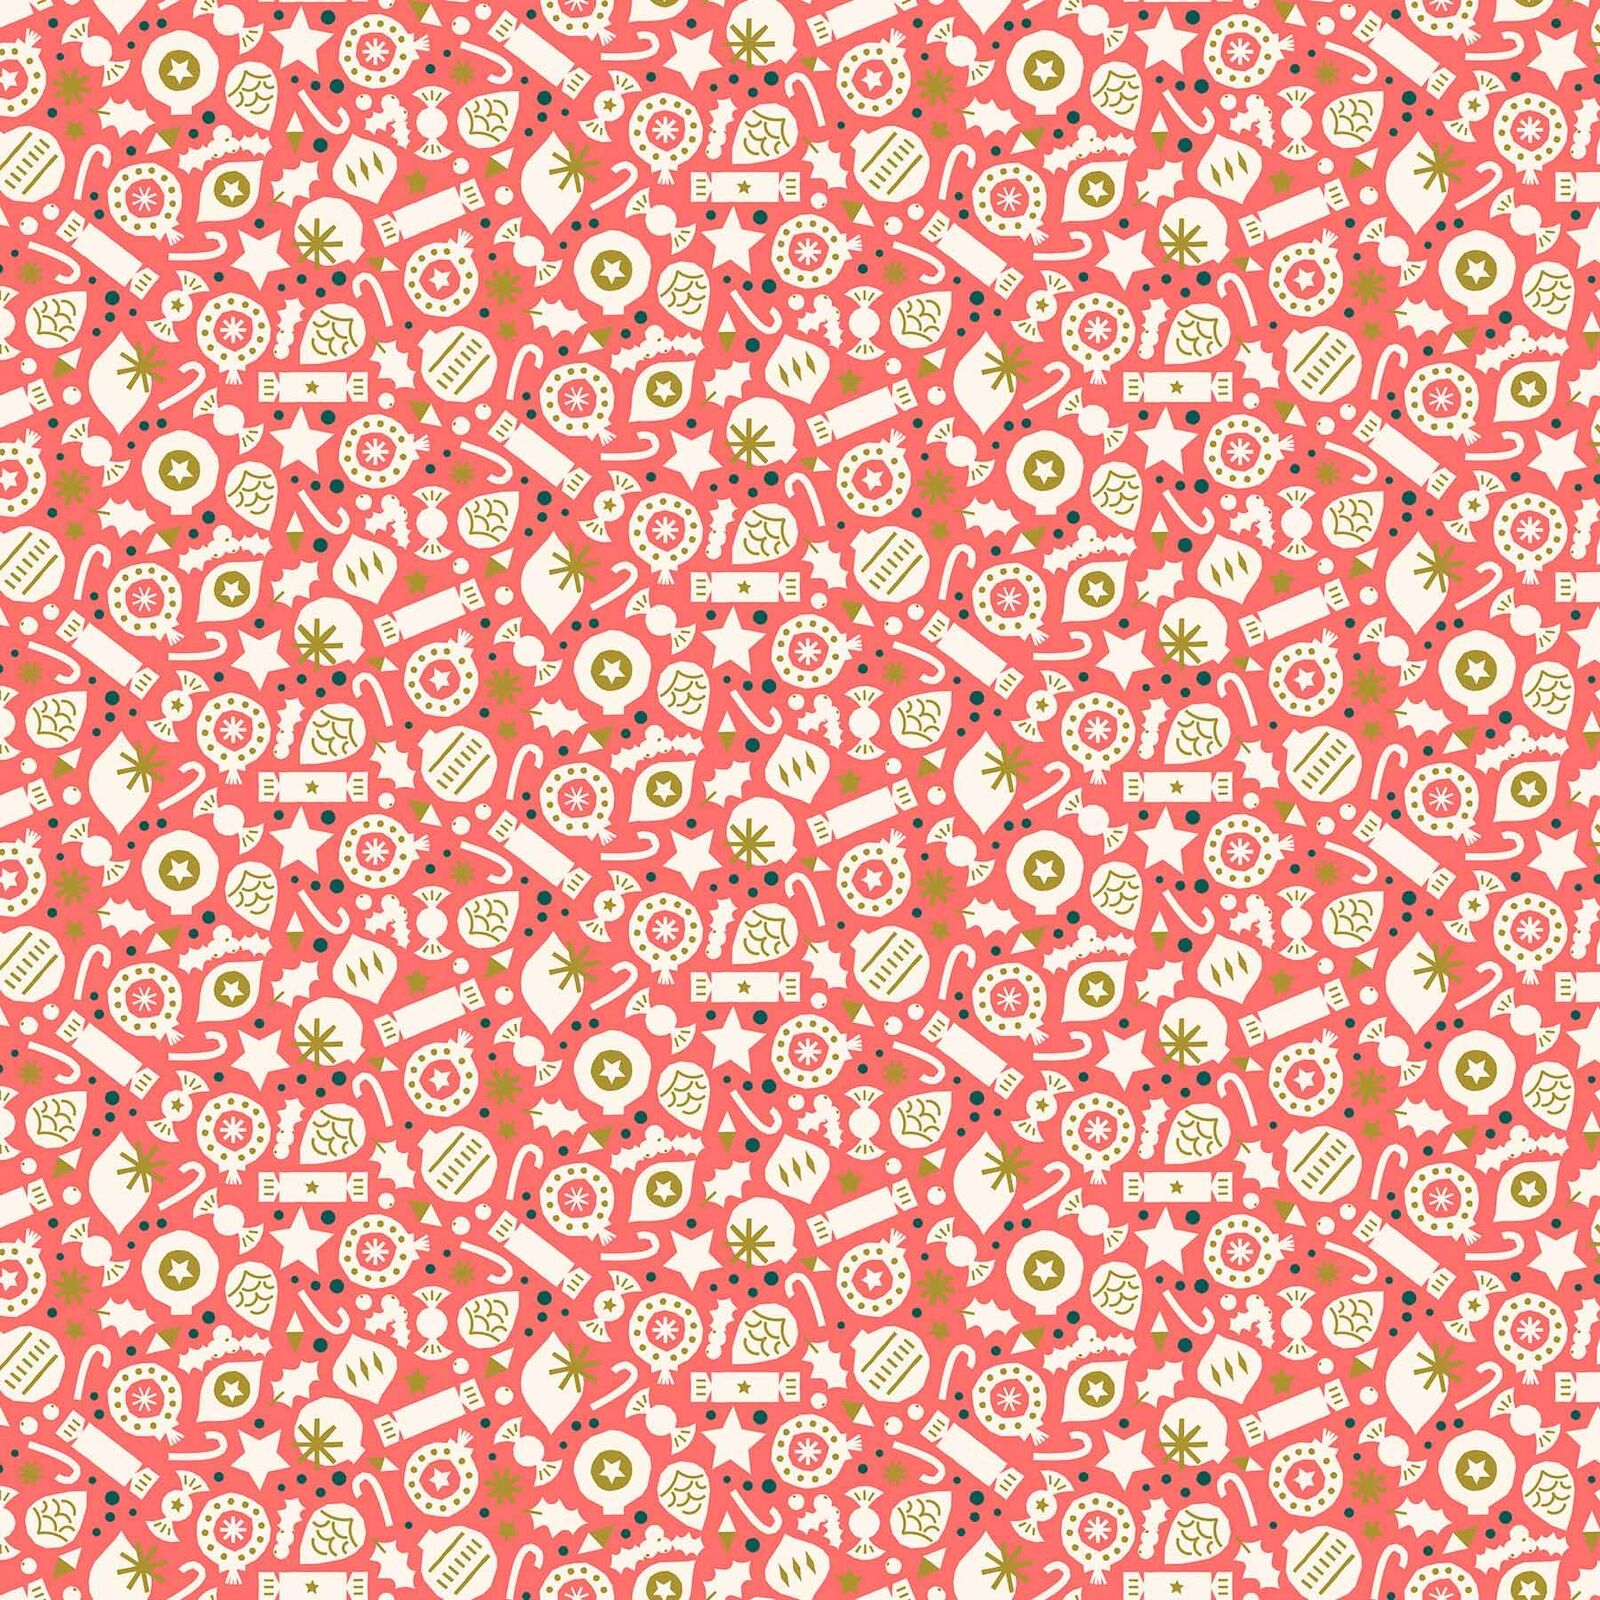 Polar Magic by Figo Fabrics - Party on Coral (90176M-23) (sold by the yard)